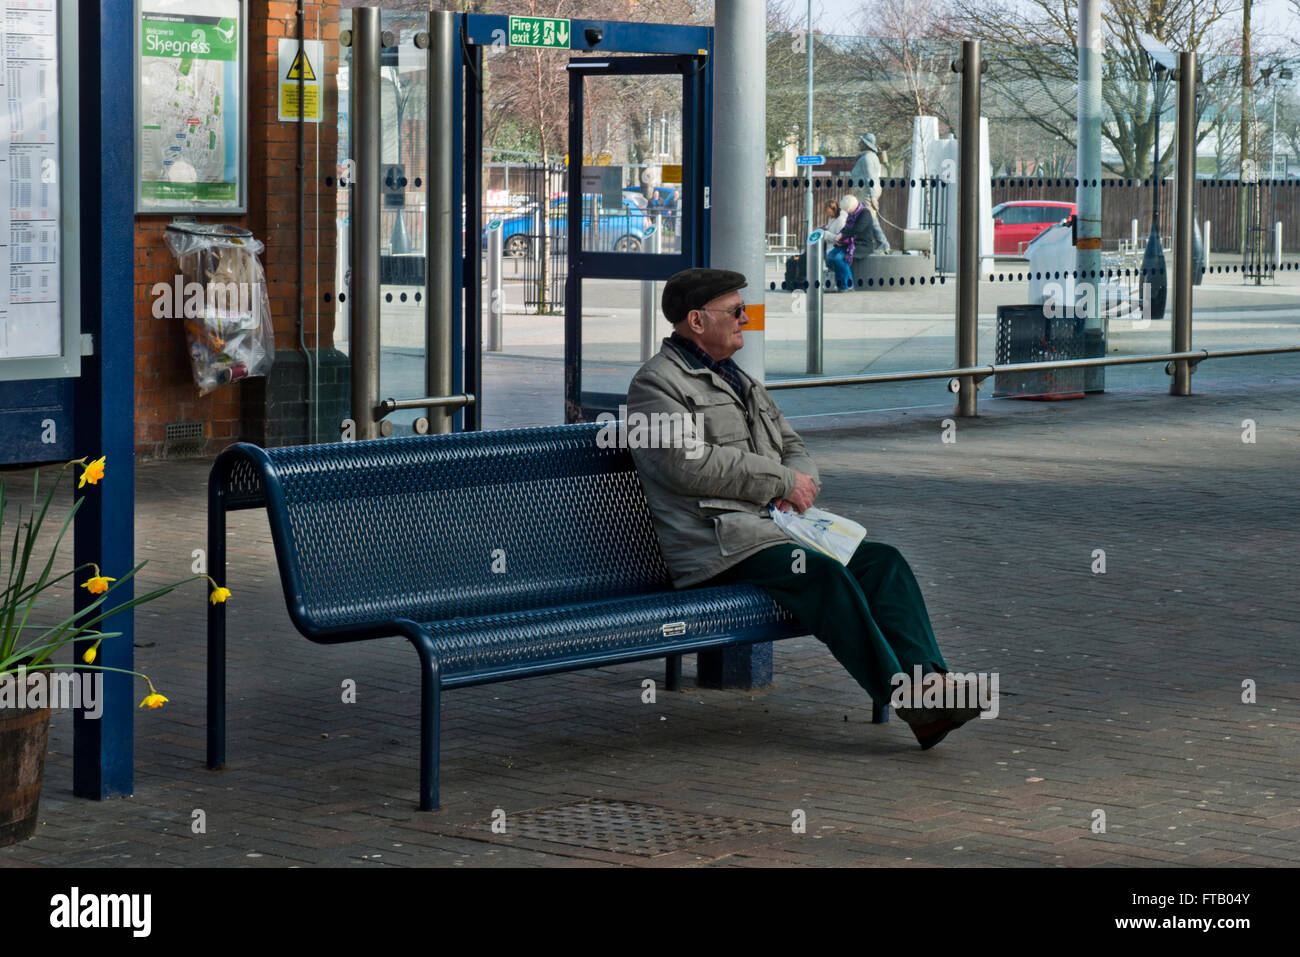 A model released image of an Old Aged Pensioner sitting alone at a railway station in Skegness, Lincolnshire, UK Stock Photo